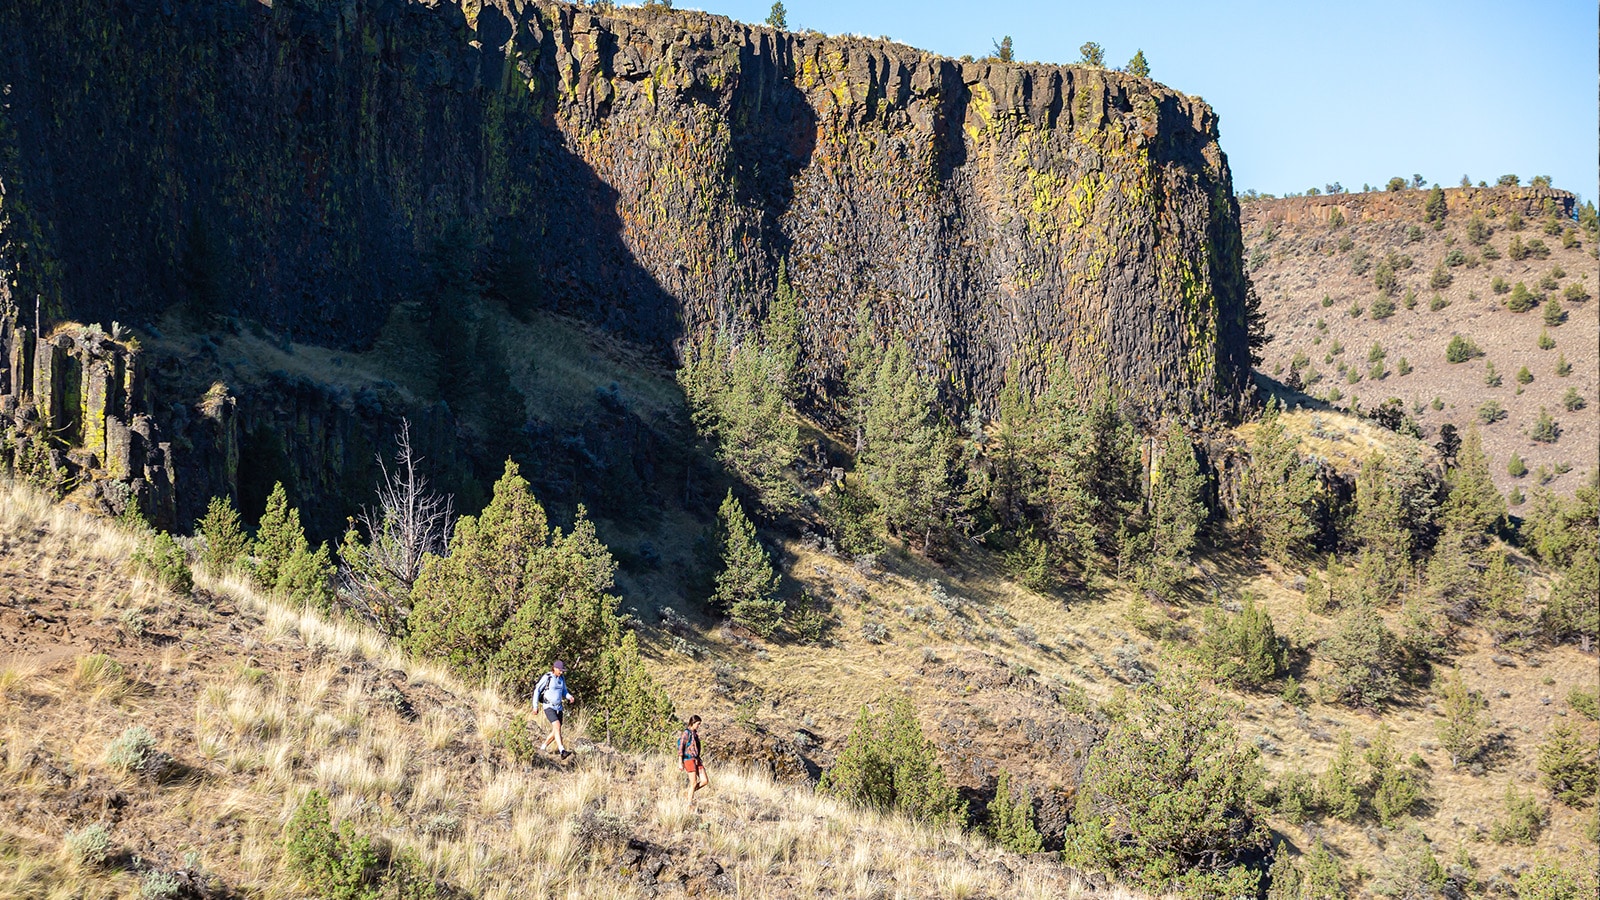 Hiking the trail to Chimney Rock near Bend, OR